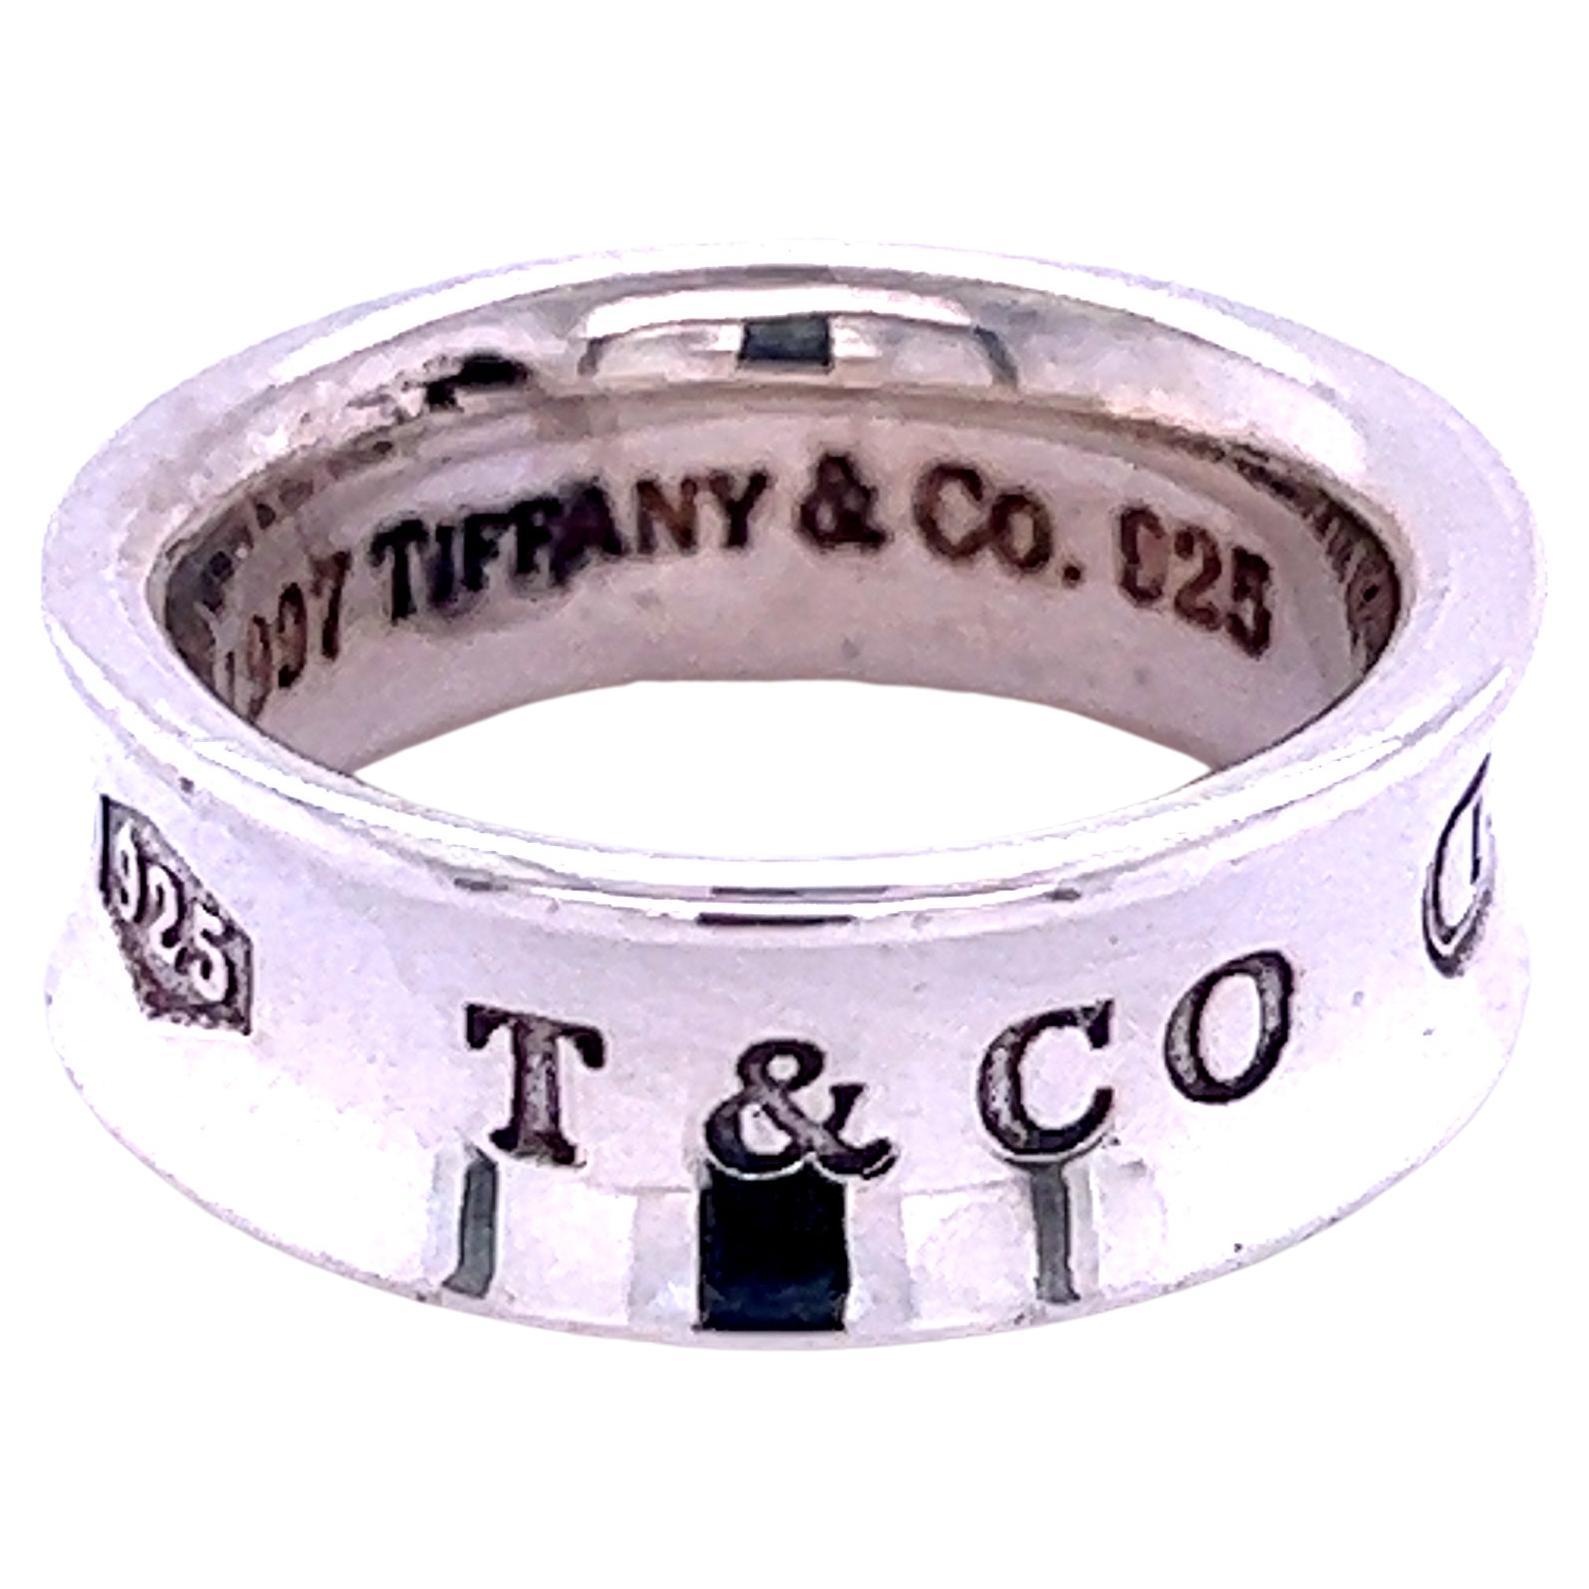 Tiffany & Co Estate 1837 Concave Band Size 4 Silver 7 mm